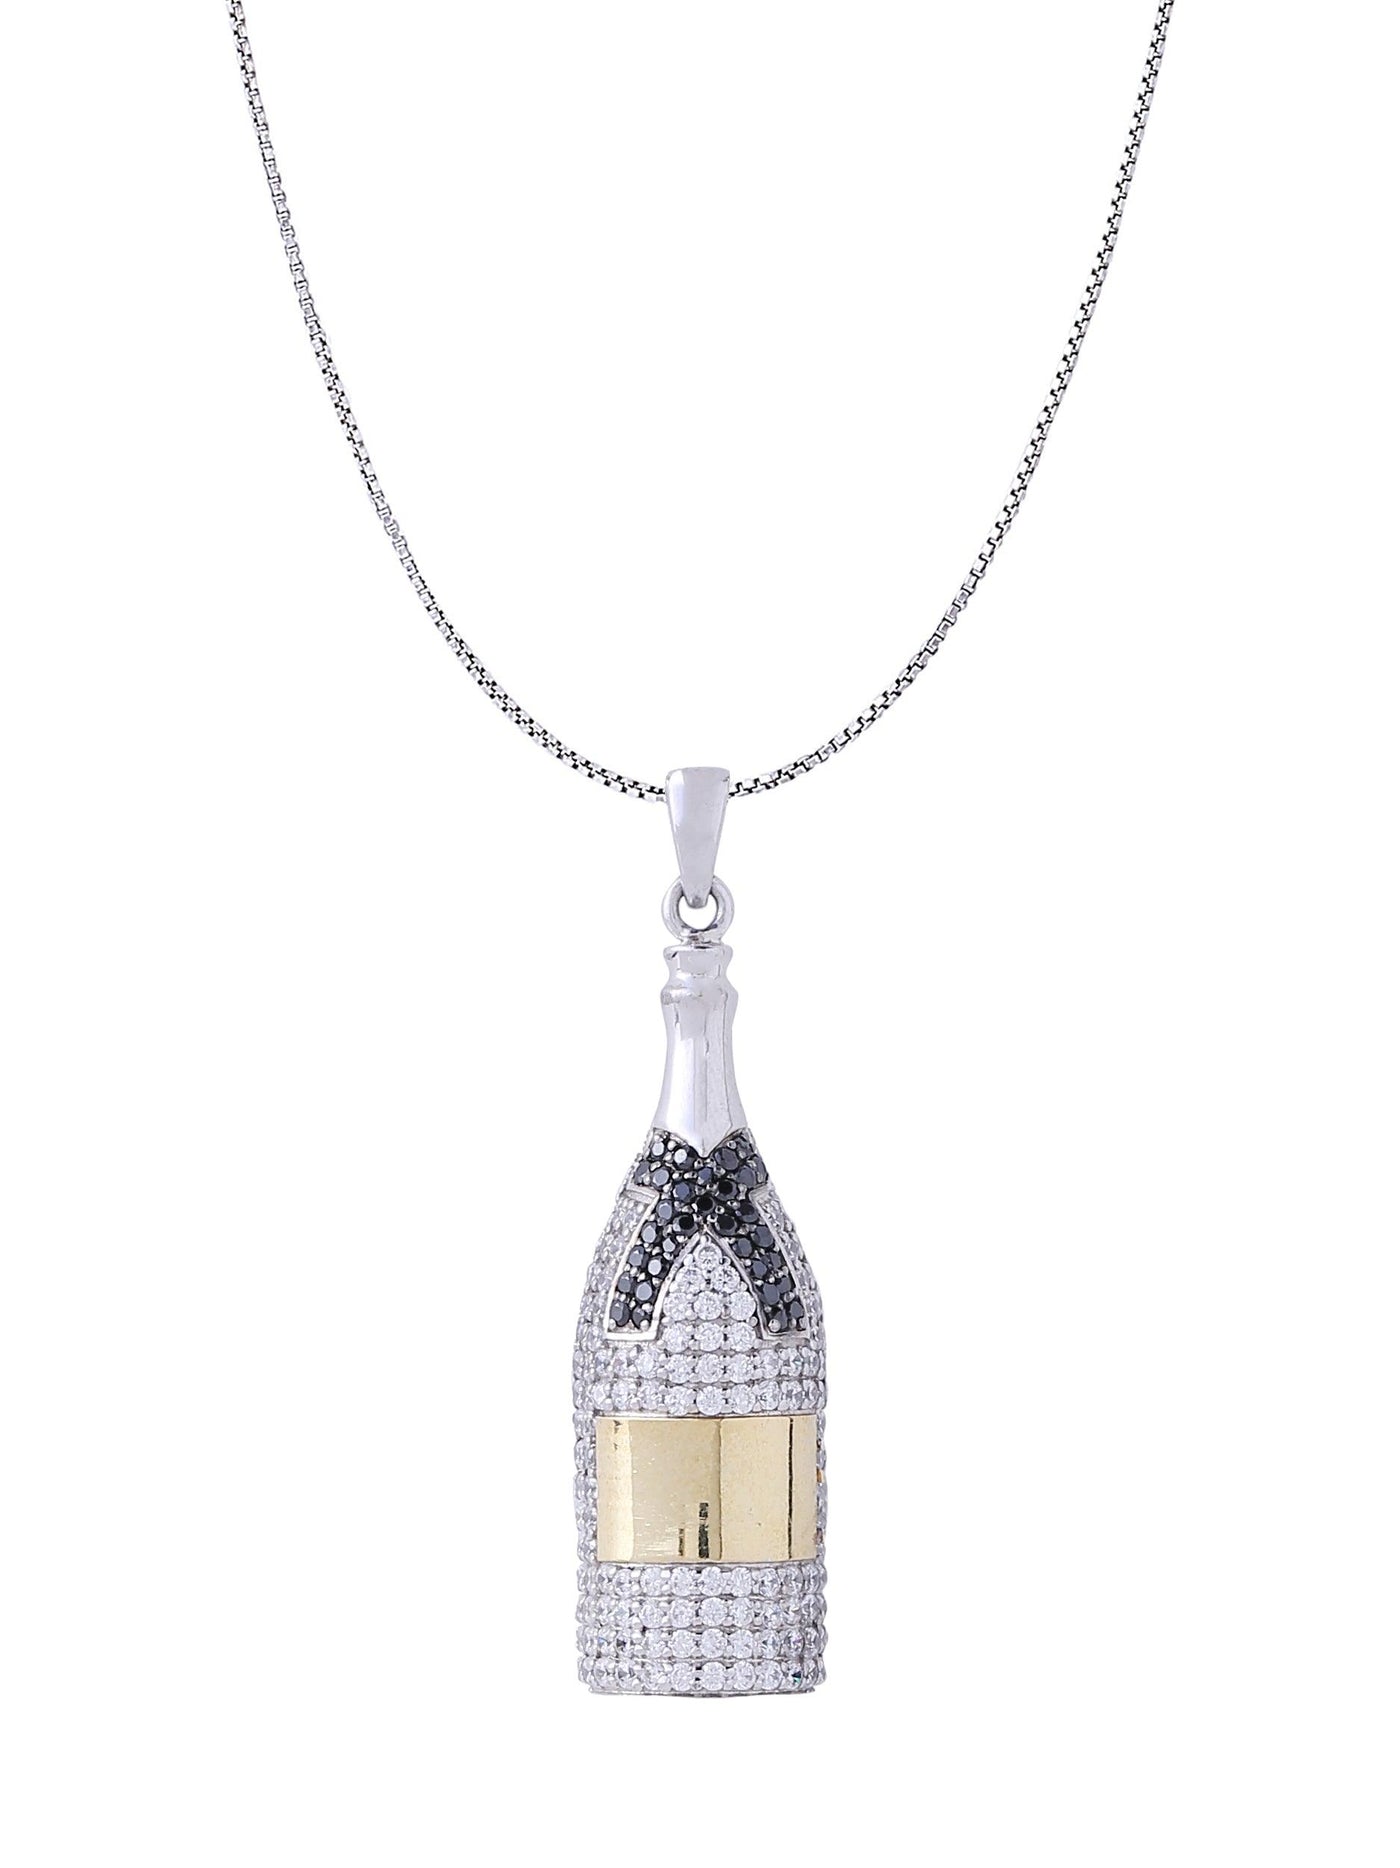 White Gold Color Champagne Pendant Made of 925 Sterling Silver Material with 20 Inch Long Silver Chain